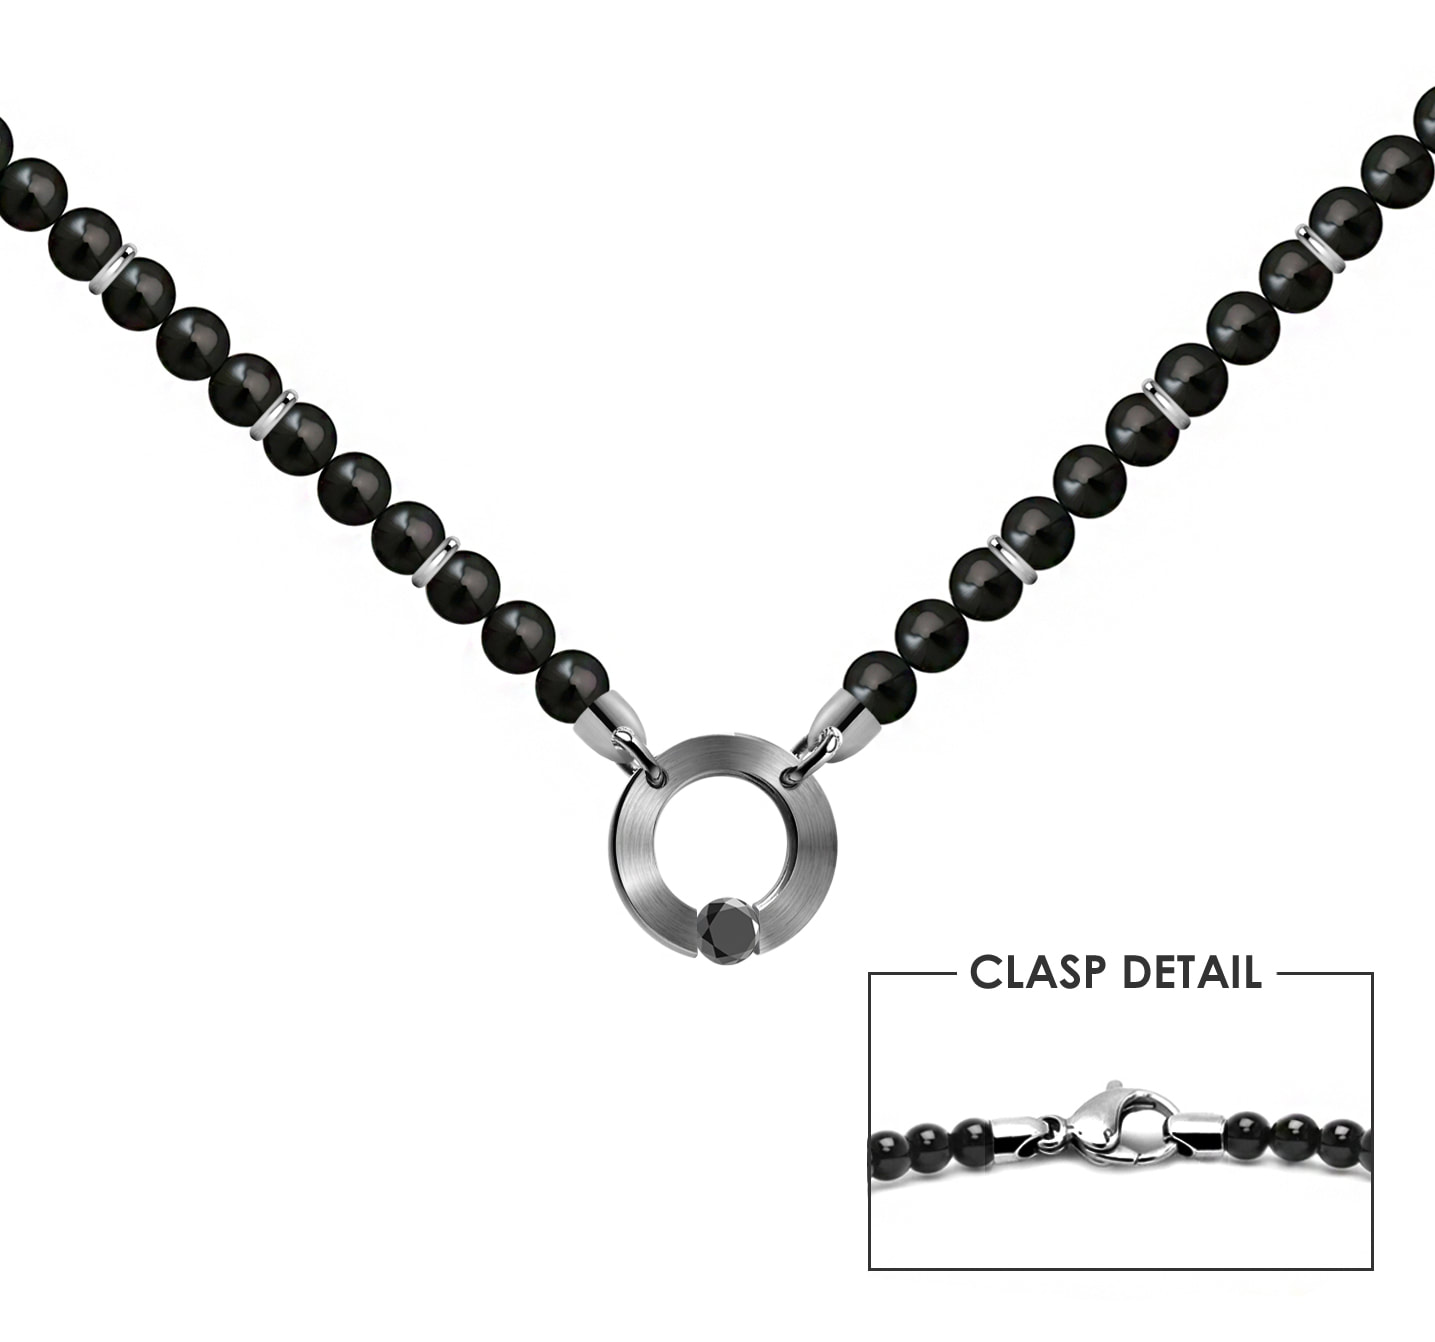 SINLEO Titanium Stainless Steel Small Beads Ball Chain Necklace for Men  Women Boy Girls Dog Tag Link Chains Black 2.4MM 16 Inches | Amazon.com